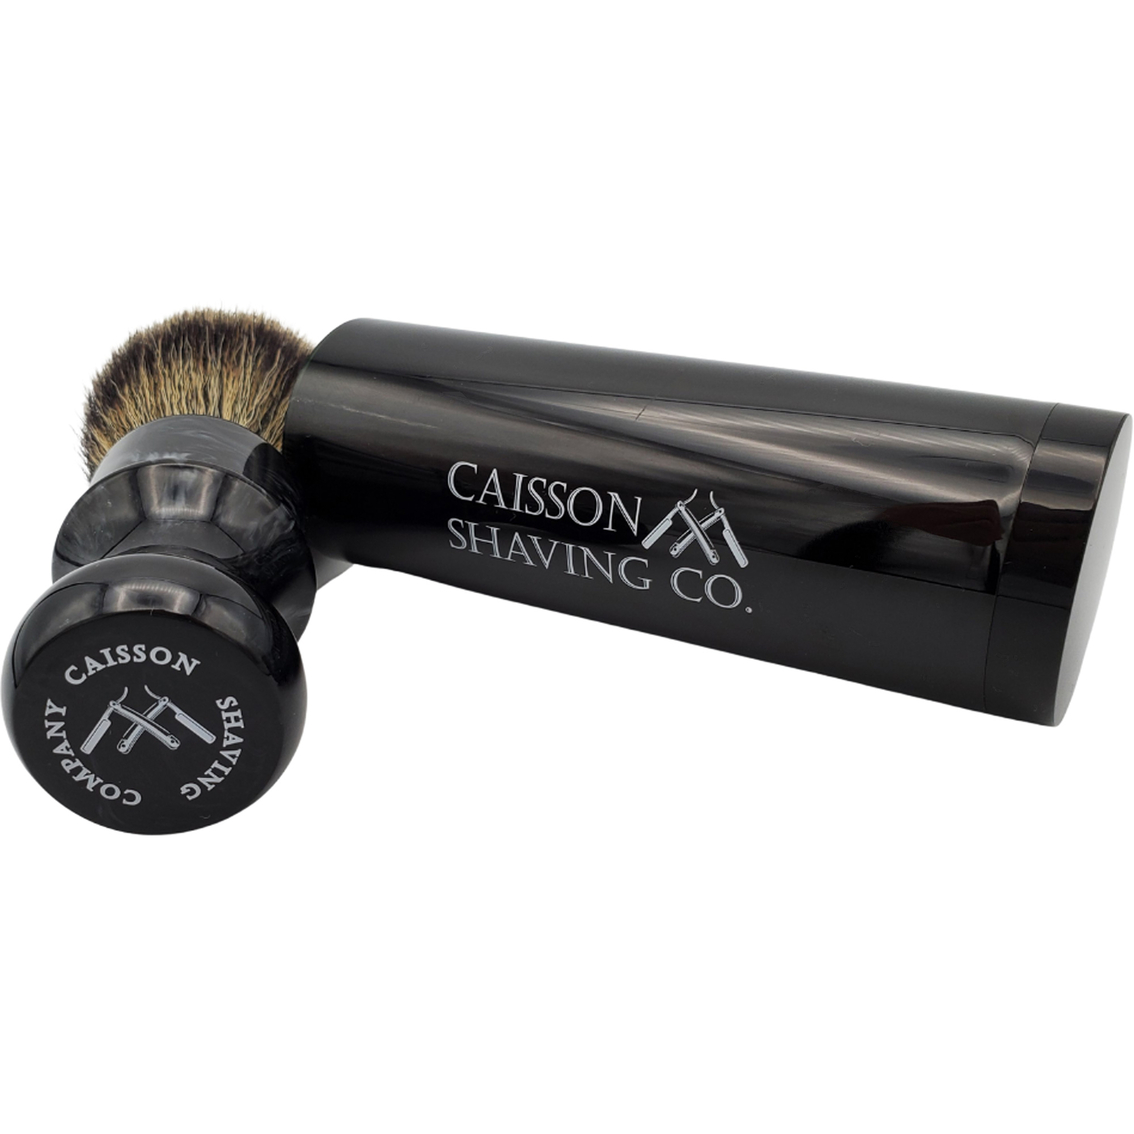 Caisson Shaving Co. 24mm Synthetic Shaving Brush with Travel Tube - Image 4 of 4